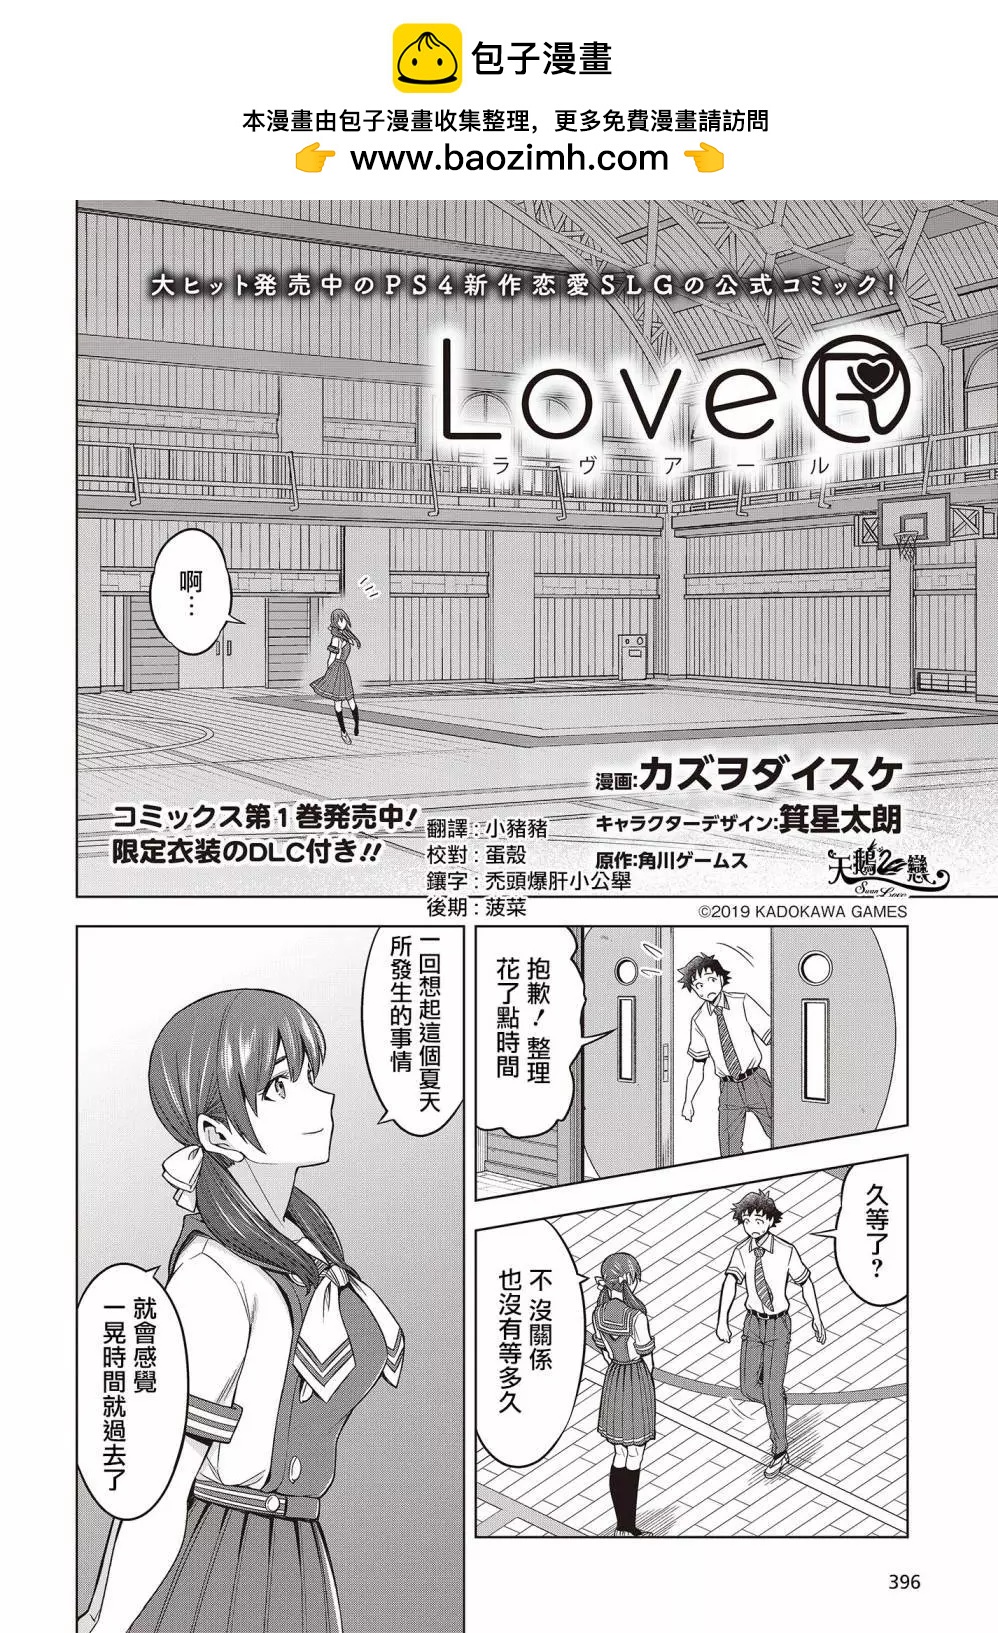 LoveR - 第08話 - 2